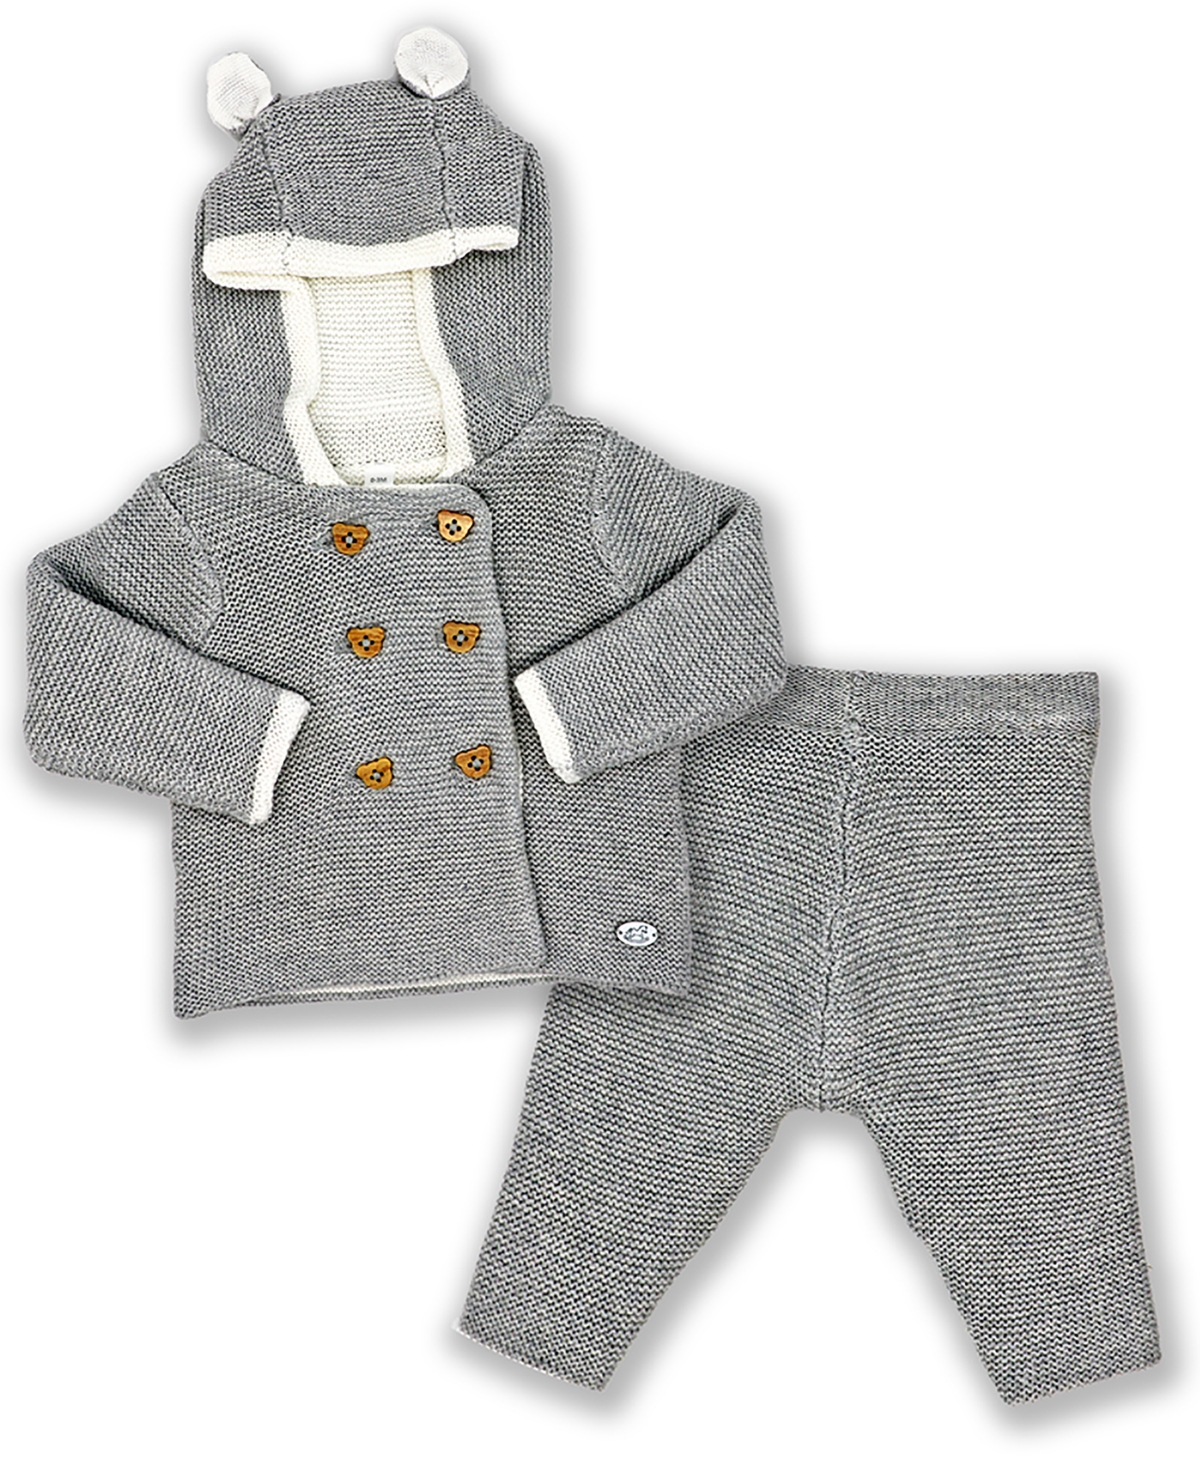 3 Stories Trading Baby Boys Or Baby Girls Sweater And Pant, 2 Piece Set In Gray